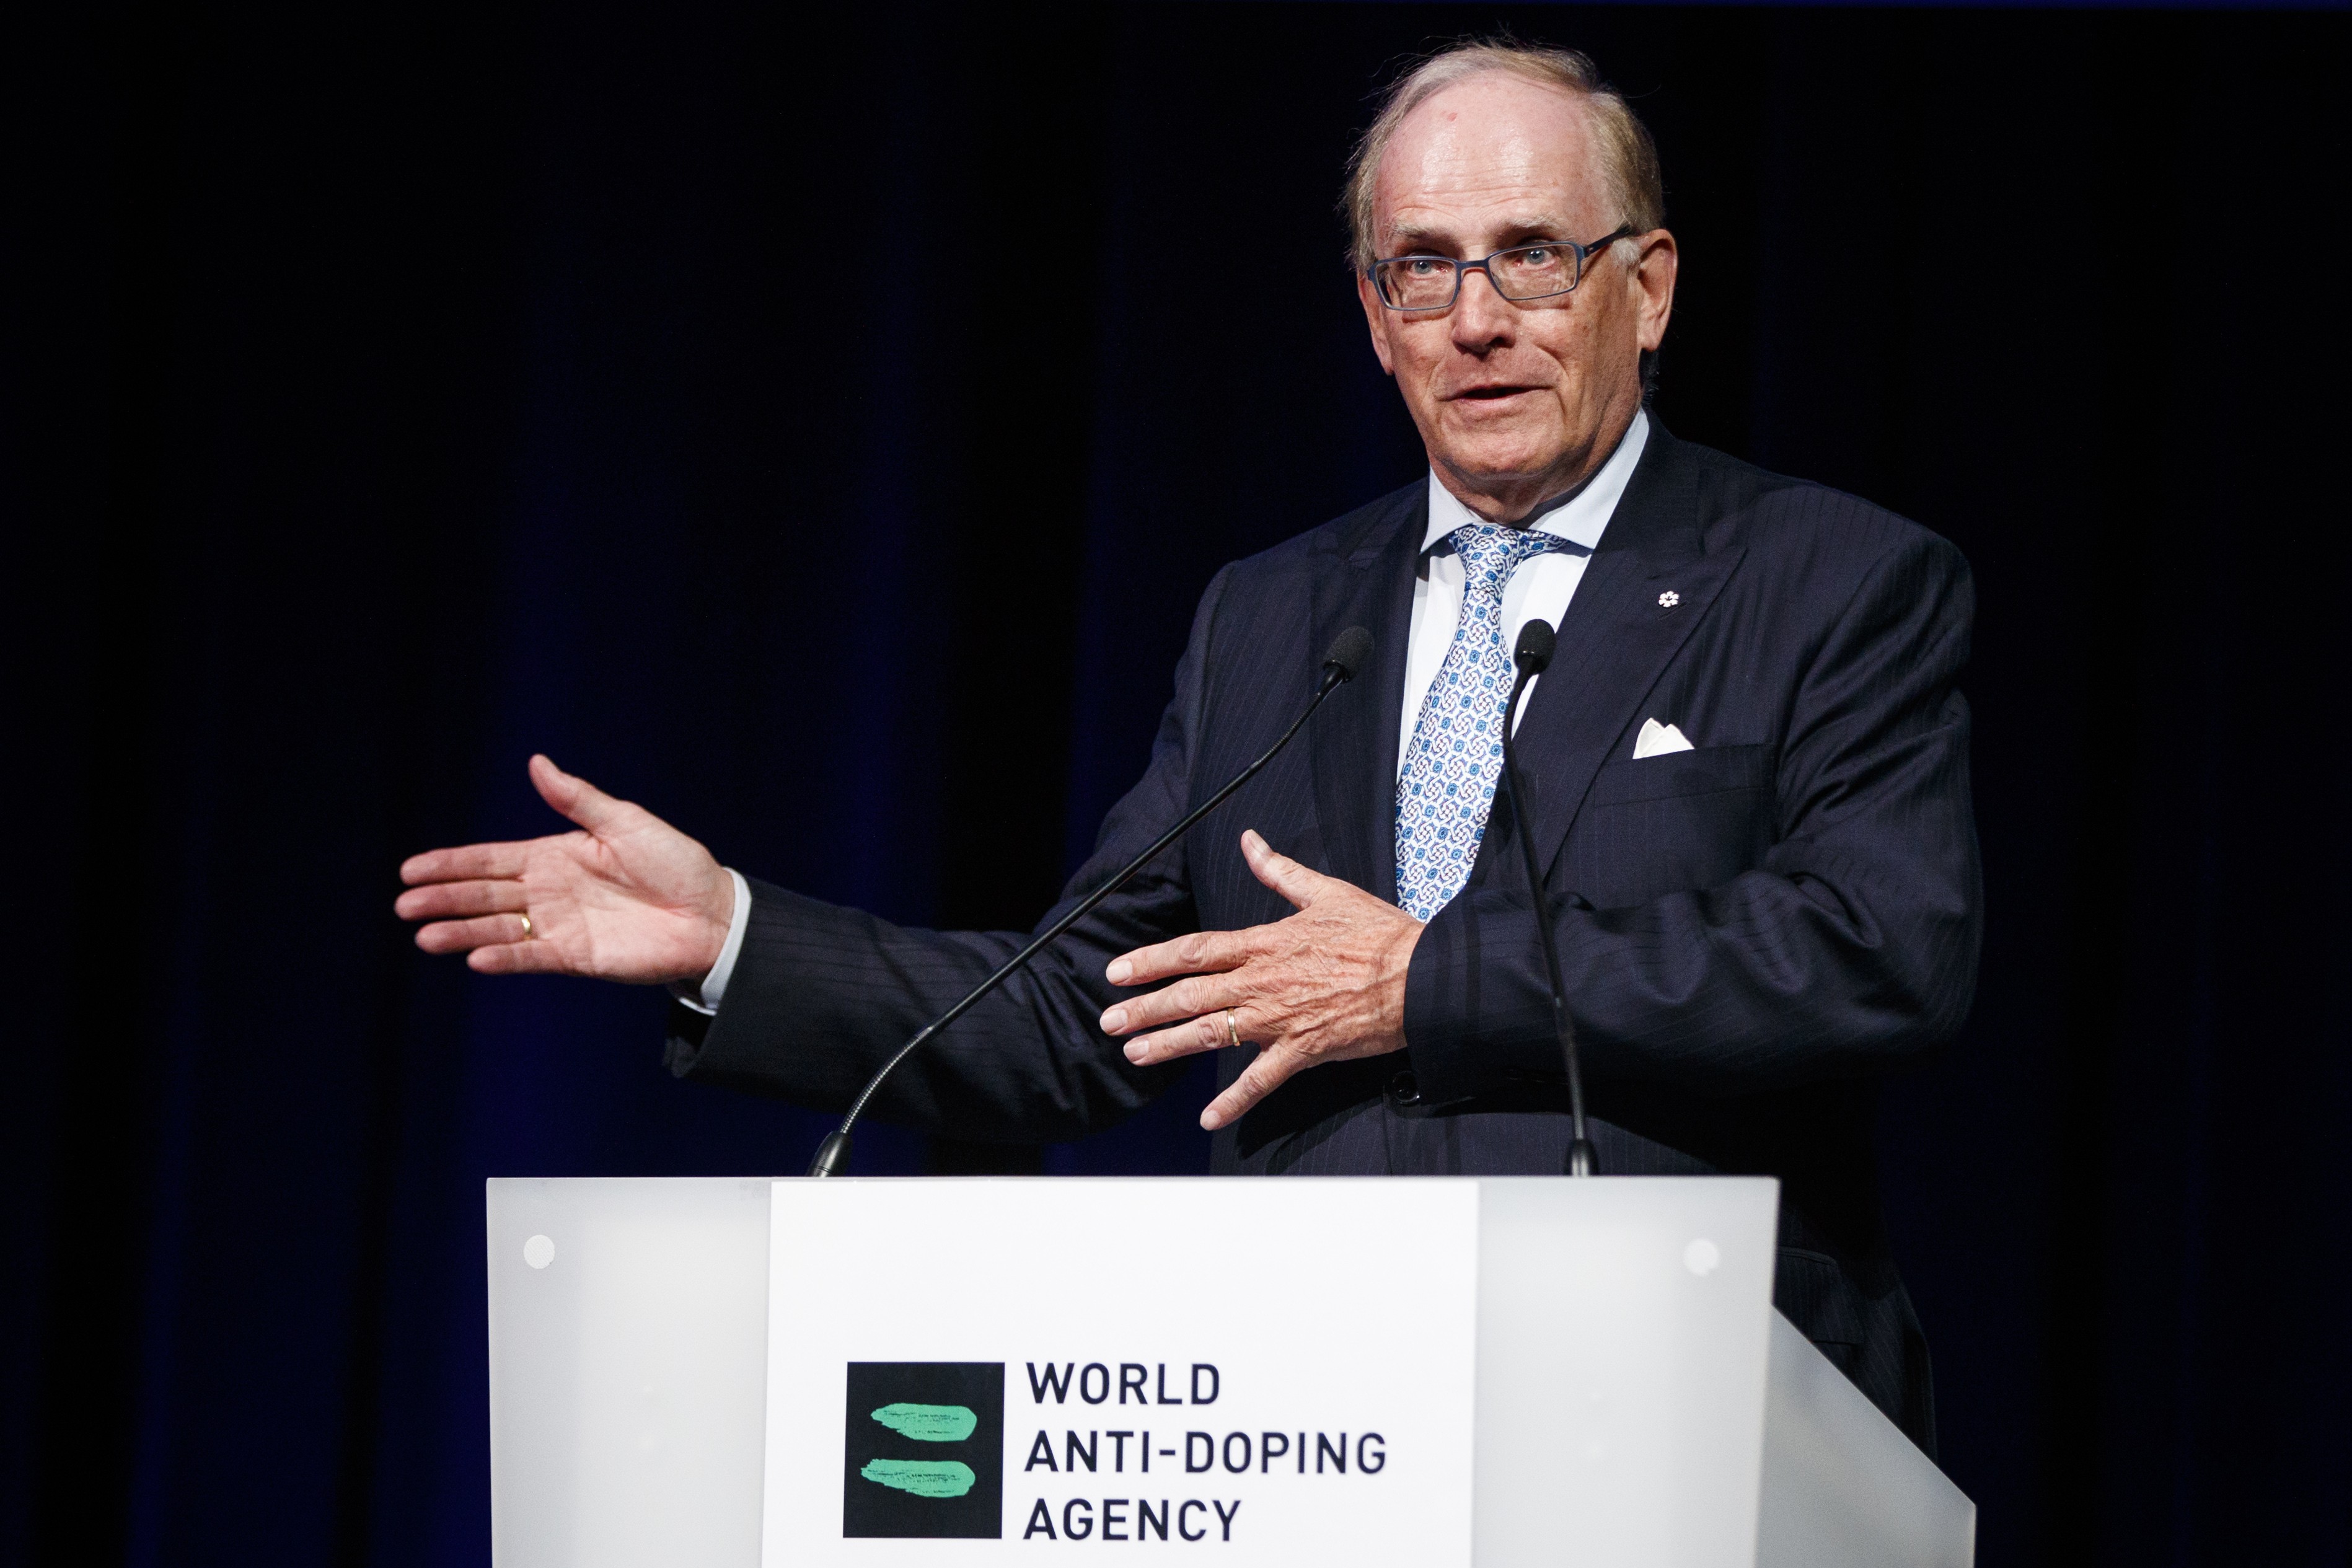 Richard McLaren speaking at the 2017 world anti-doping agency annual symposium in Lausanne, Switzerland. McLaren warned that Russia risks more punishment for its Olympic athletes due to its refusal to admit guilt for doping at the Sochi Winter Olympics. Photo: Keystone via AP